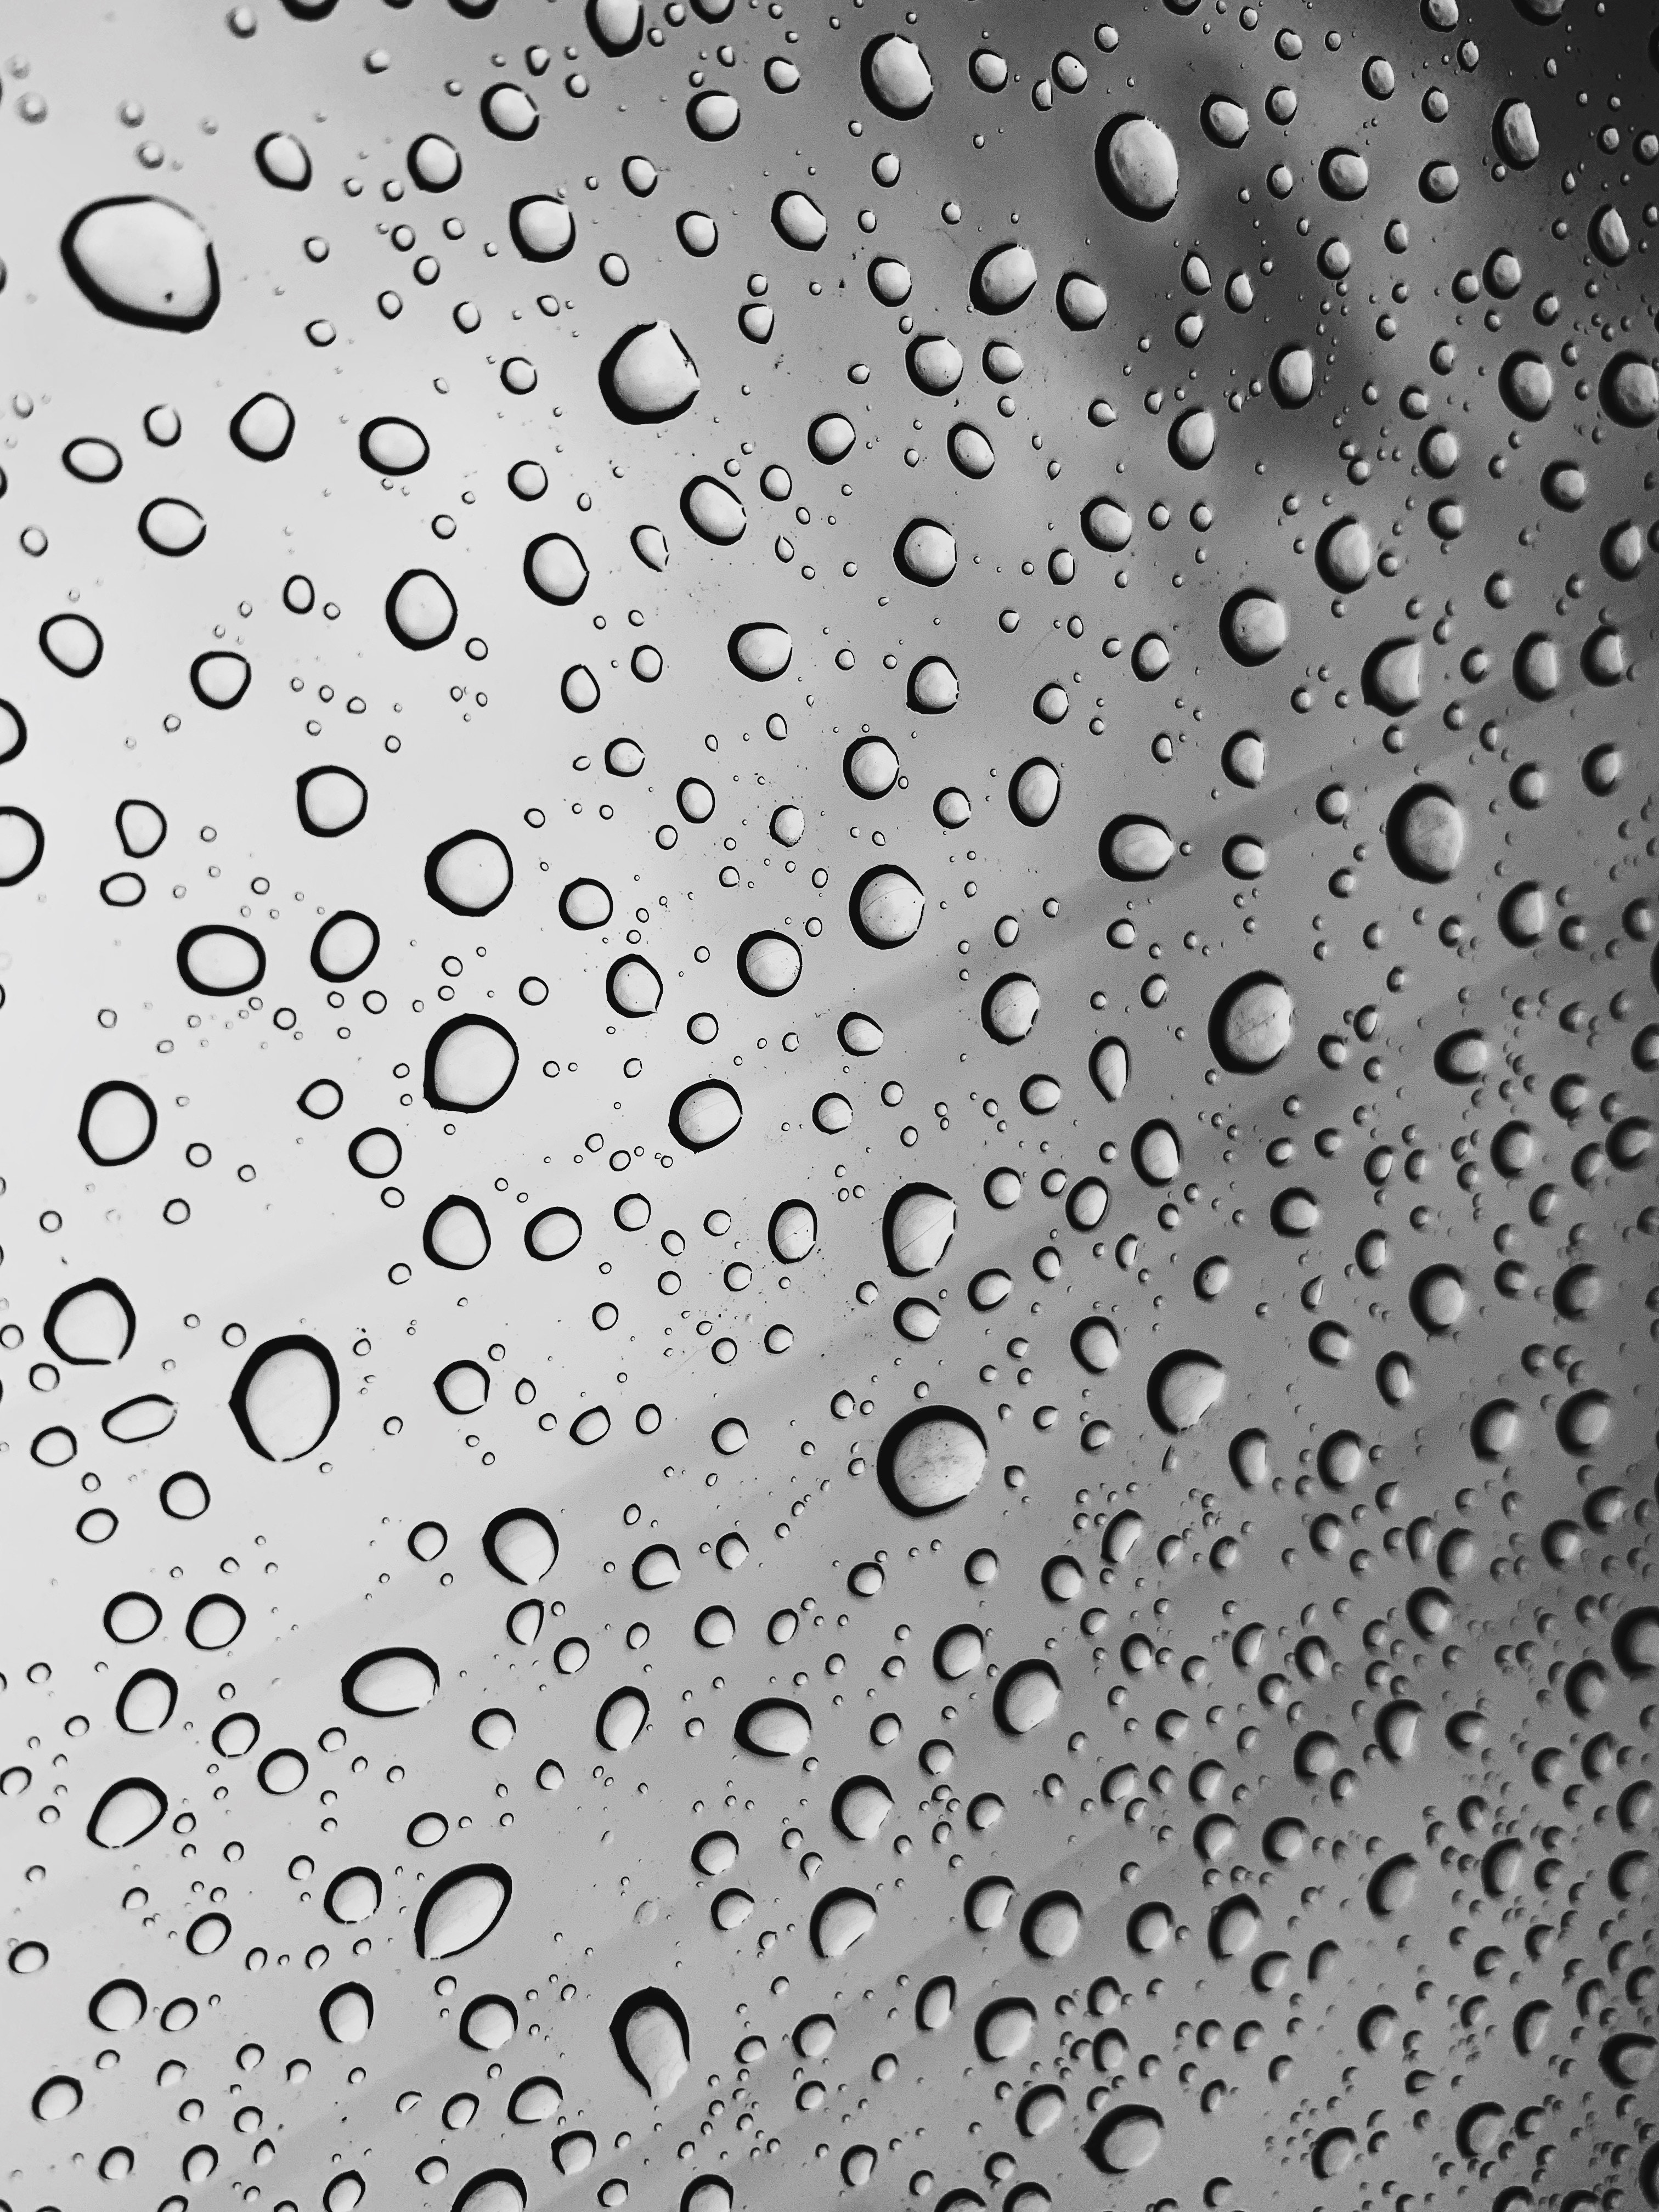 Phone Background drops, macro, surface, chb